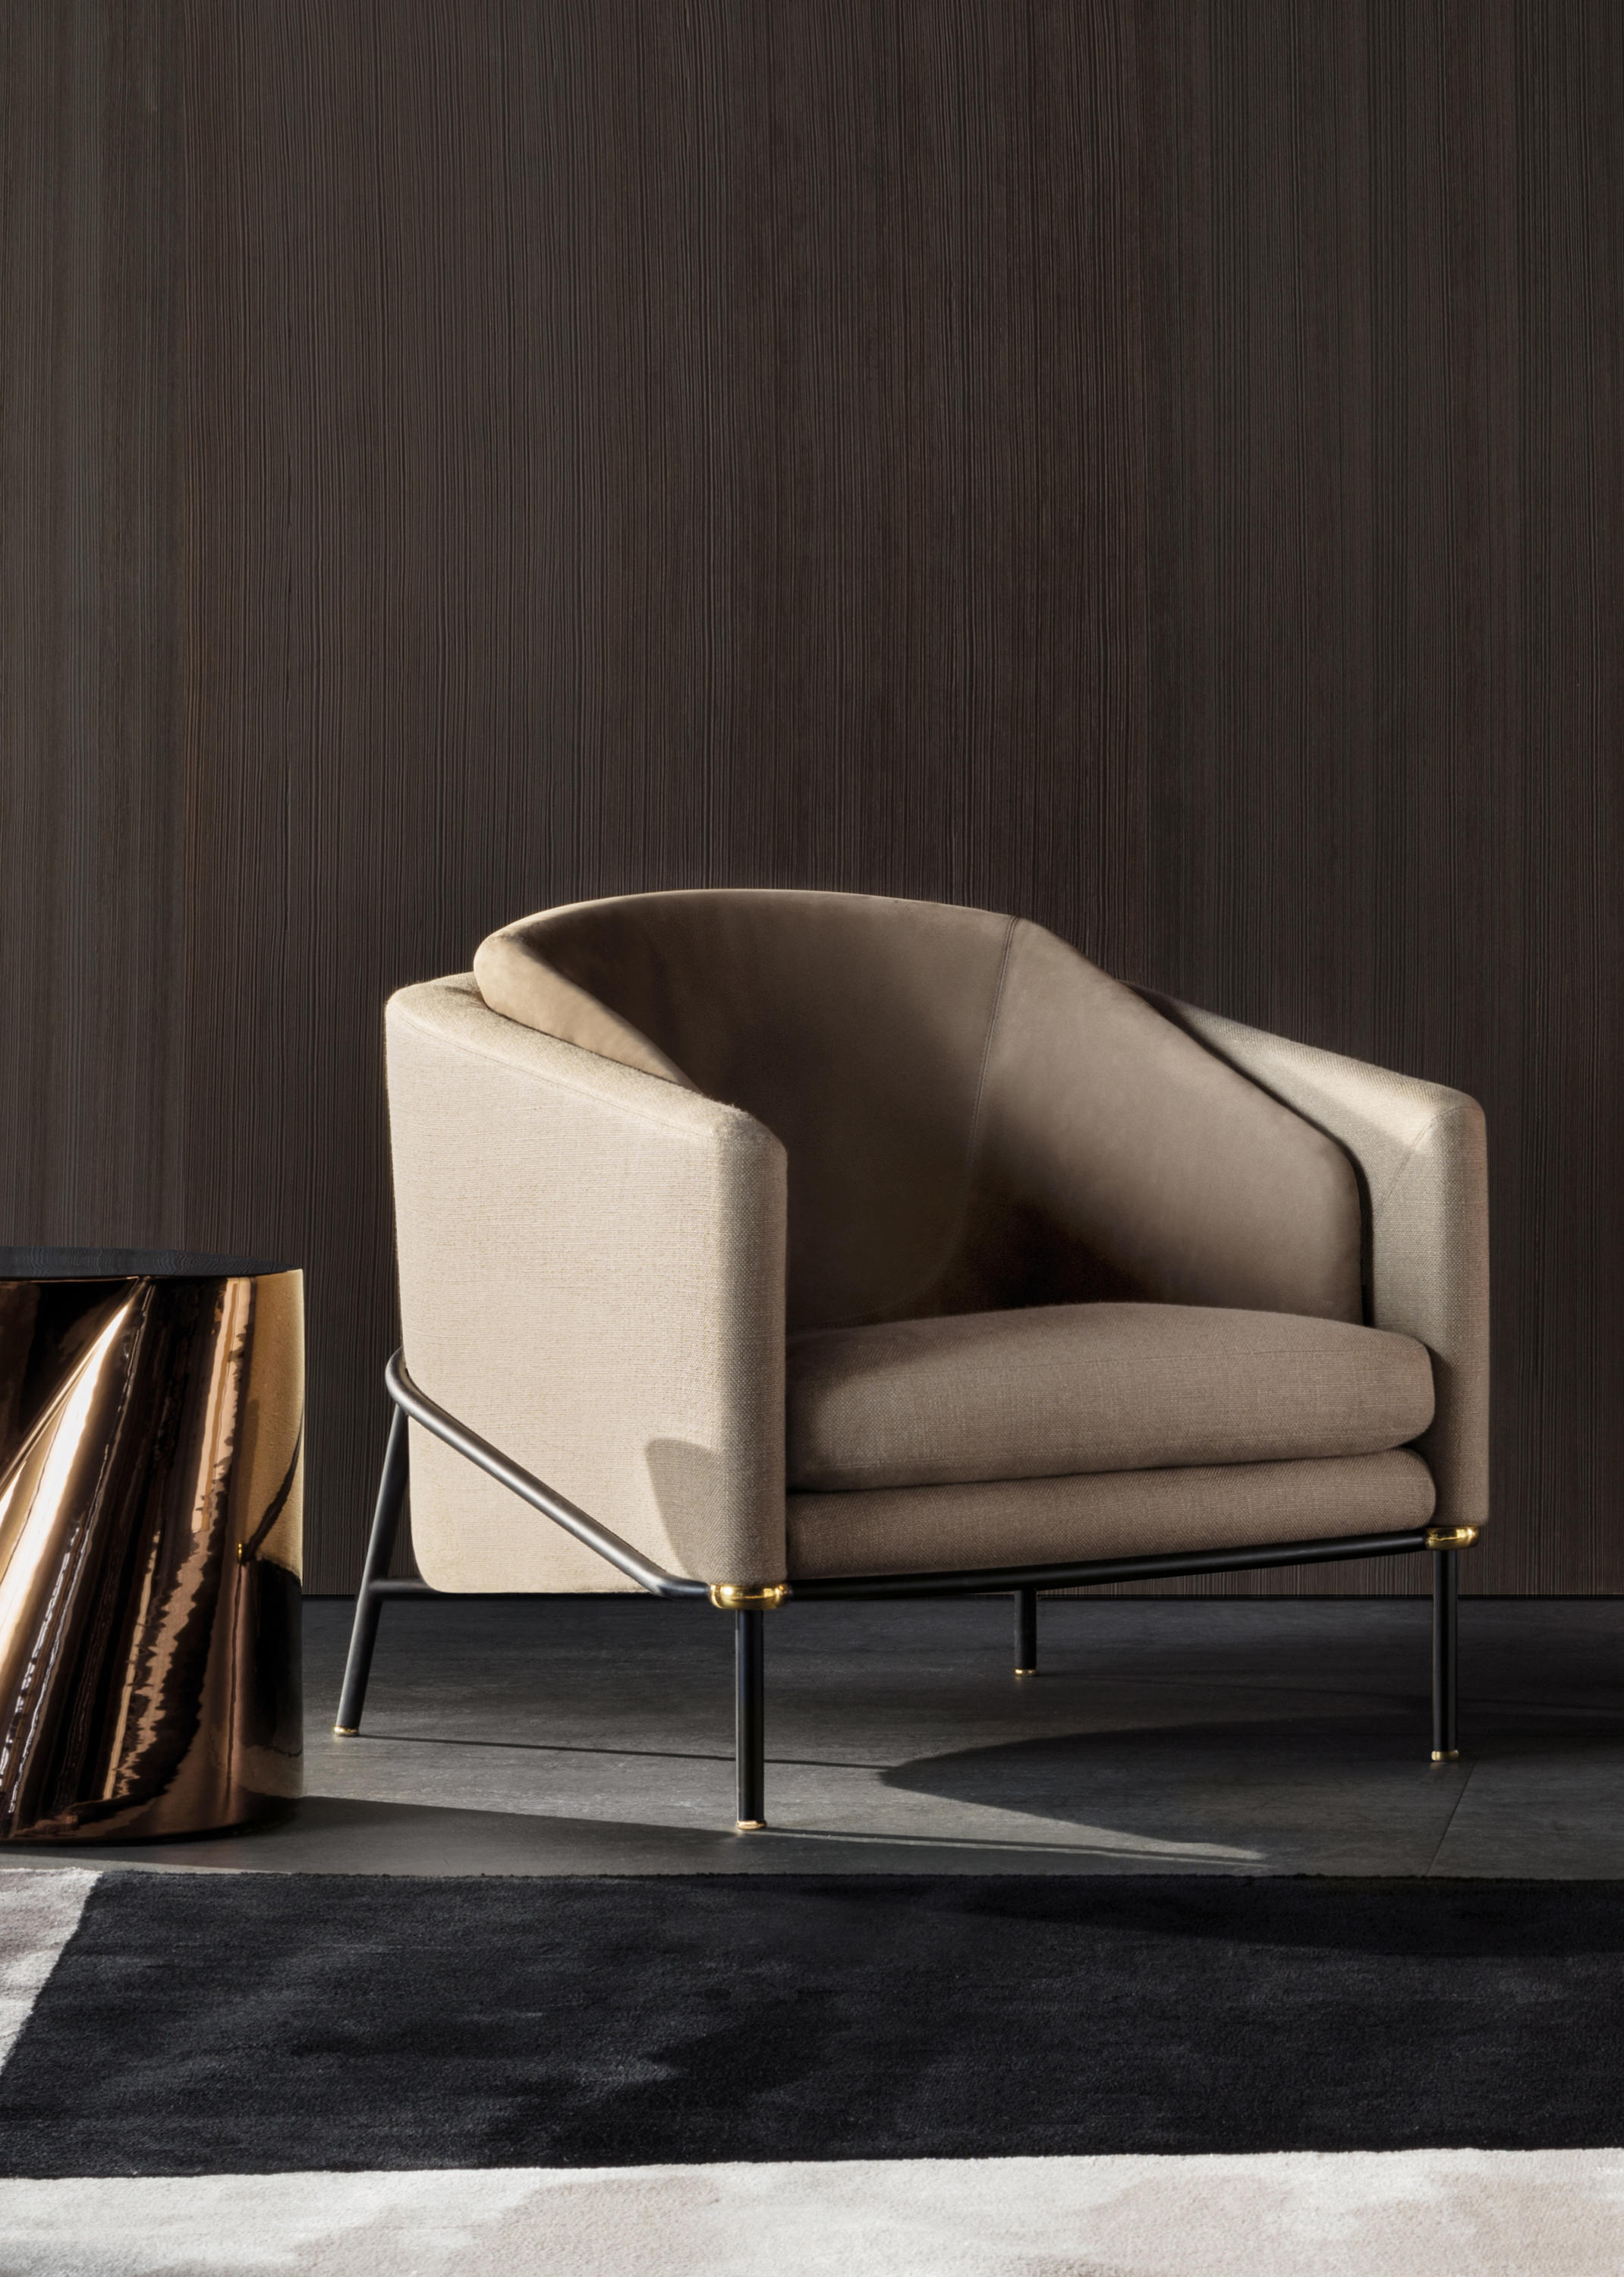 Fil Noir Chair Collection by Christophe Delcourt for Minotti